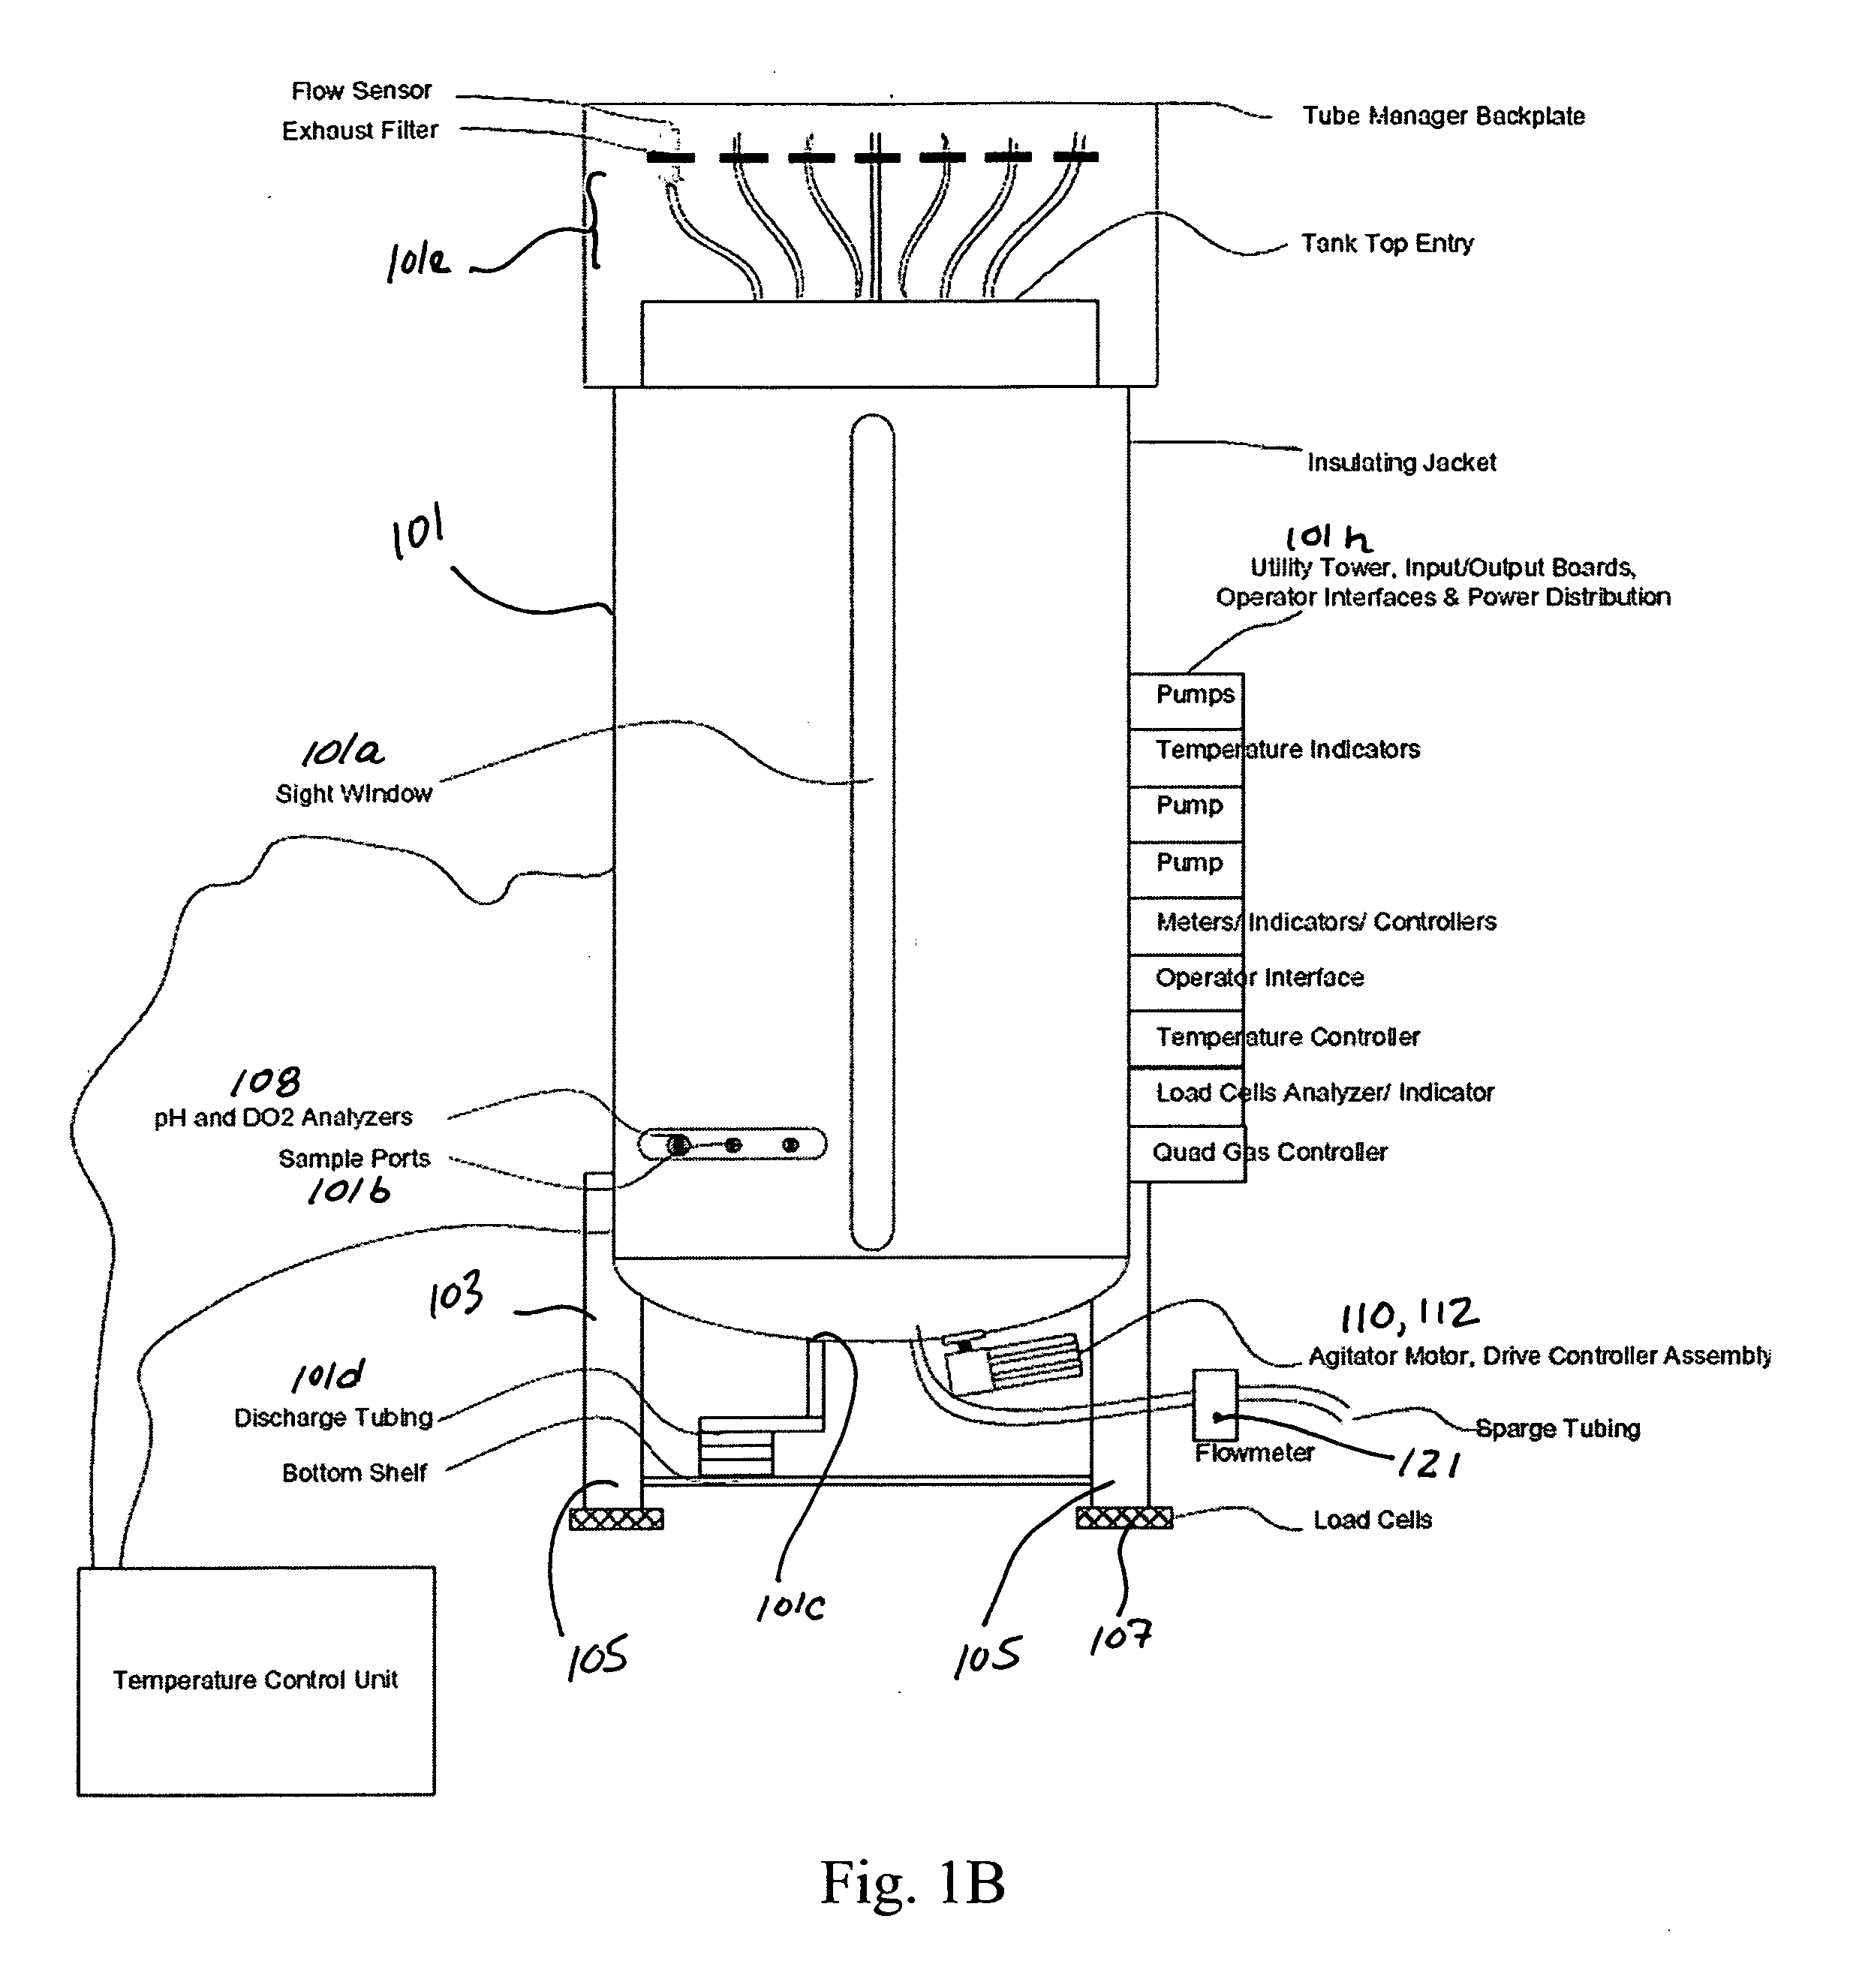 Disposable bioreactor systems and methods